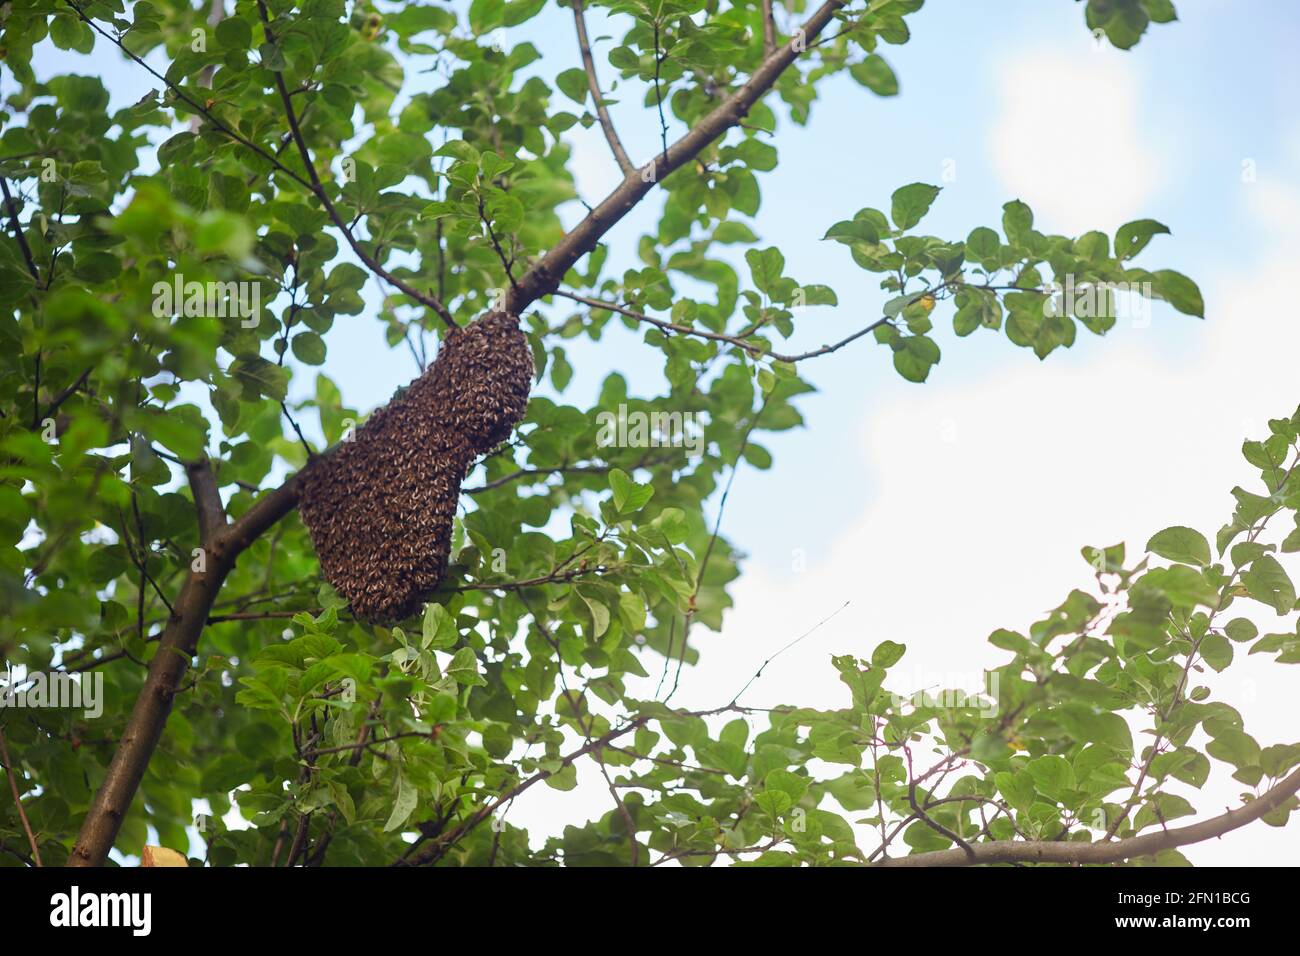 From below view of swarm of honeybees creating big beehive on tree branch in sunny summer day. Insects flying around honeycomb in garden, polluting flowers. Apriculture, beekeeping concept. Stock Photo